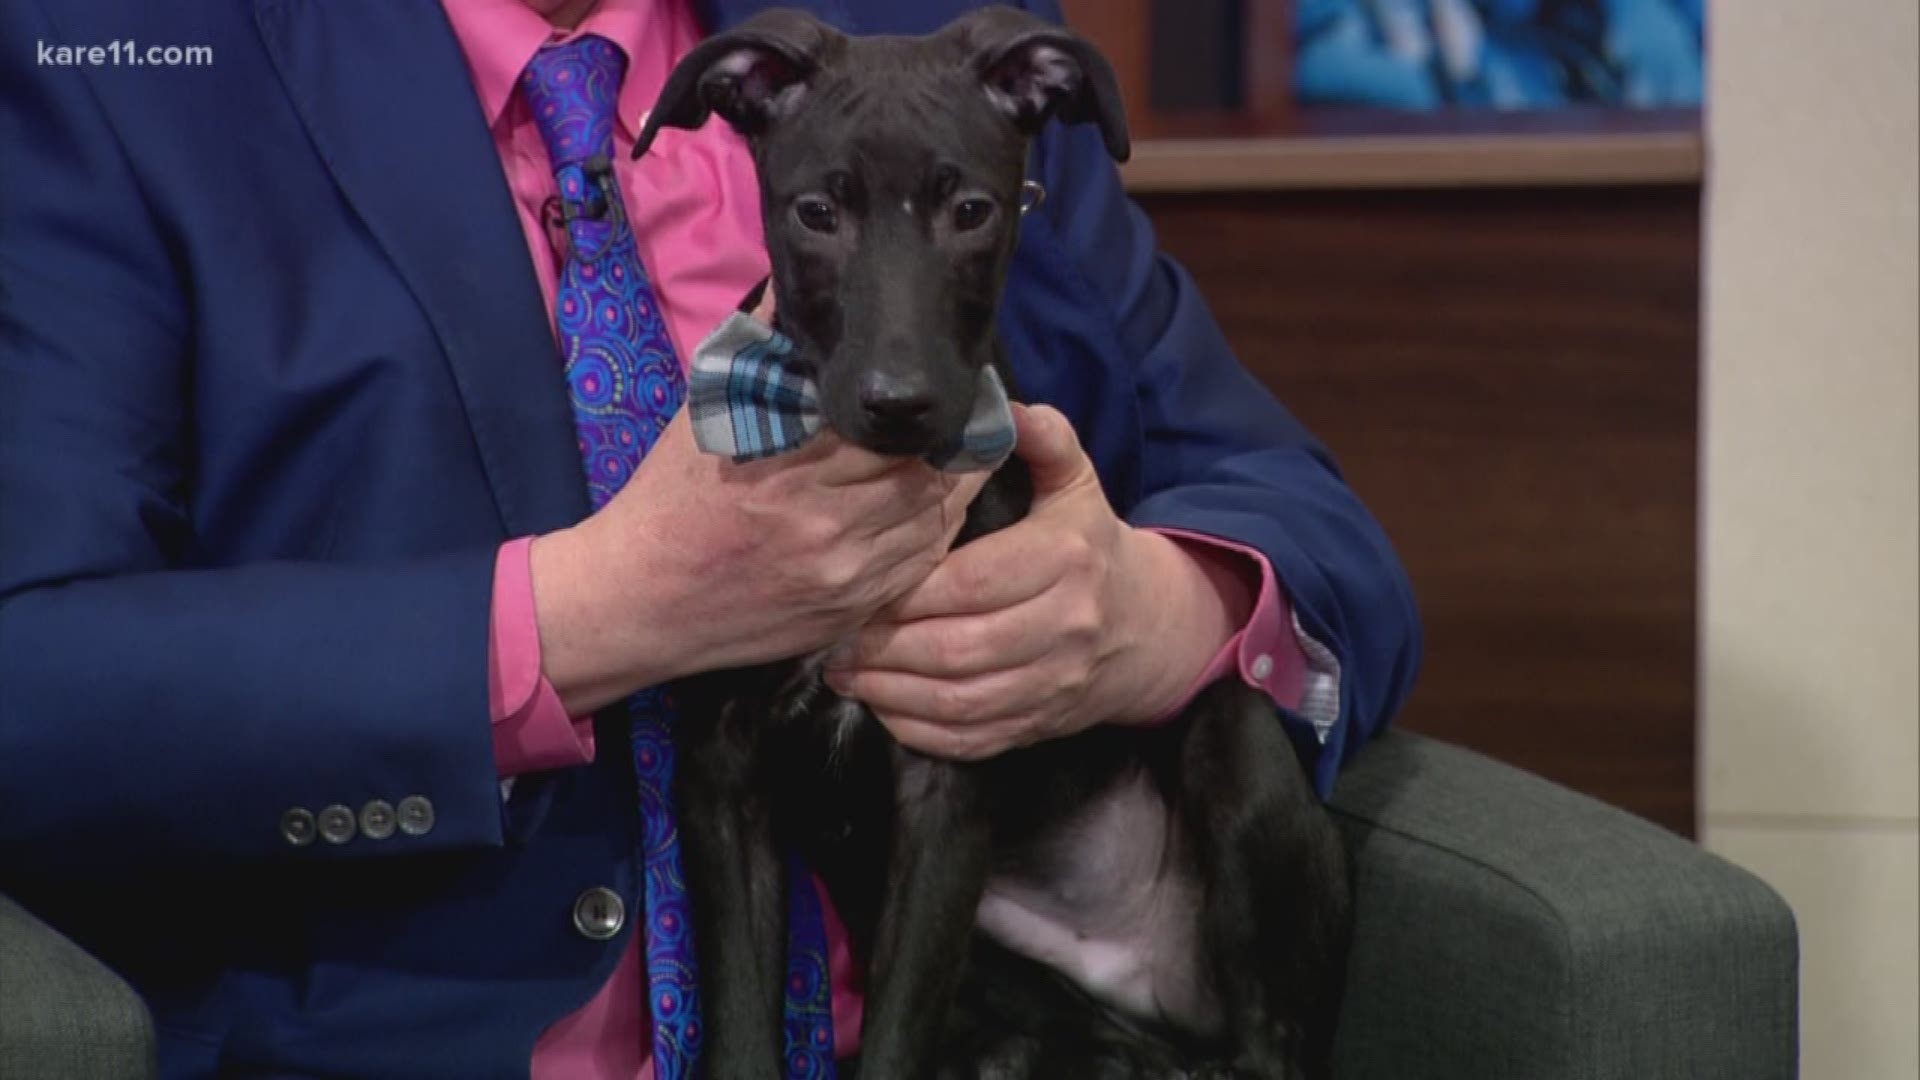 Saturday, March 23 is National Puppy Day, and what better way to celebrate than to give a puppy a forever home? Secondhand Hounds is a local non-profit rescue and adoption organization, and Founder Rachel Mairose joined us on KARE News@4 to talk about how you can get involved with them and how to know when you are ready to adopt a puppy.